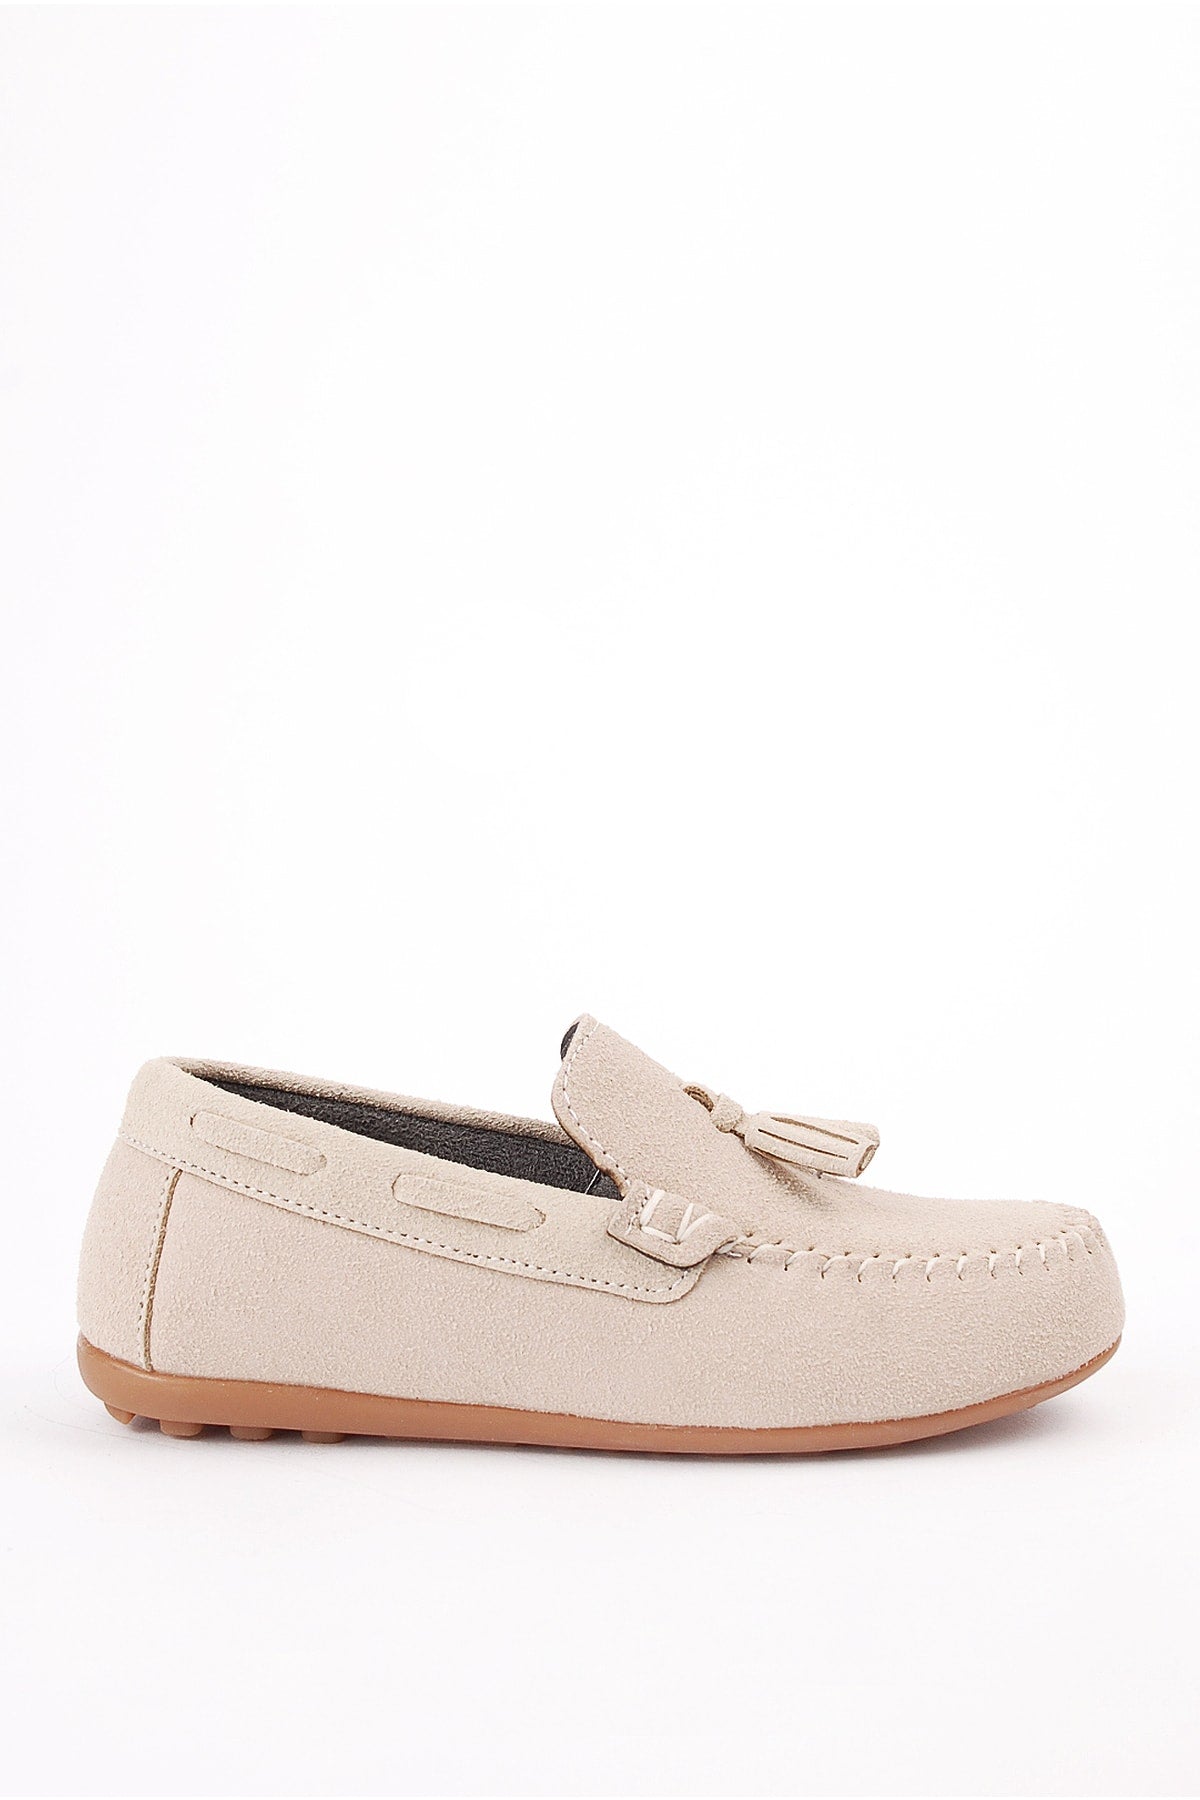 Boys Suede Loafers Loafers Cream